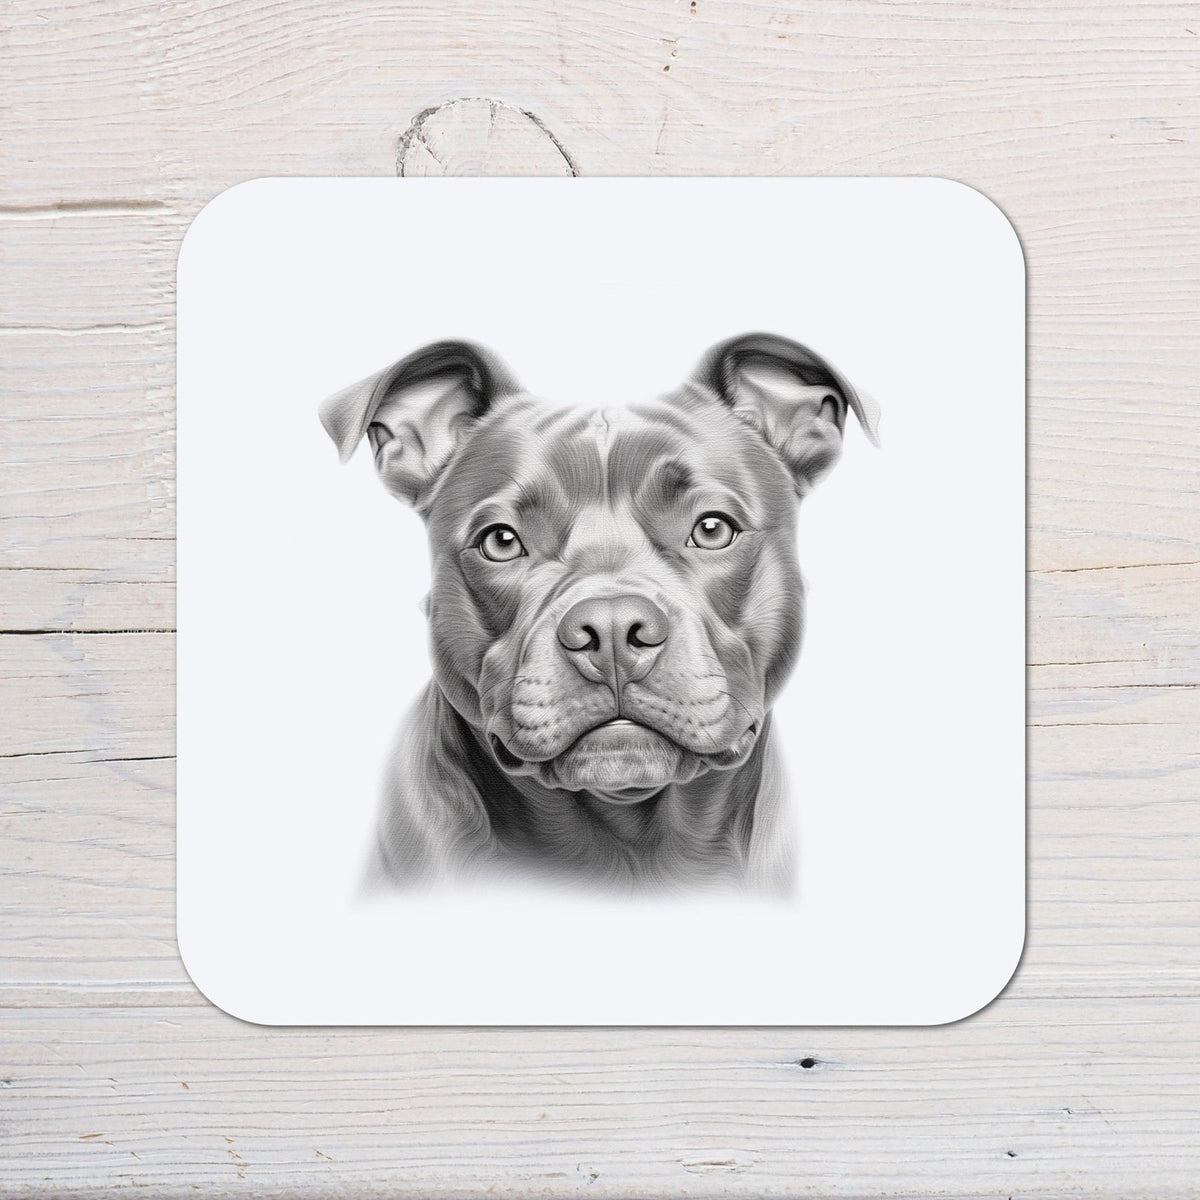 Staffy Dog Coaster personalised with any Wording, Message - ideal gift for Staffordshire Bull Terrier lovers - Rainbowprint.uk